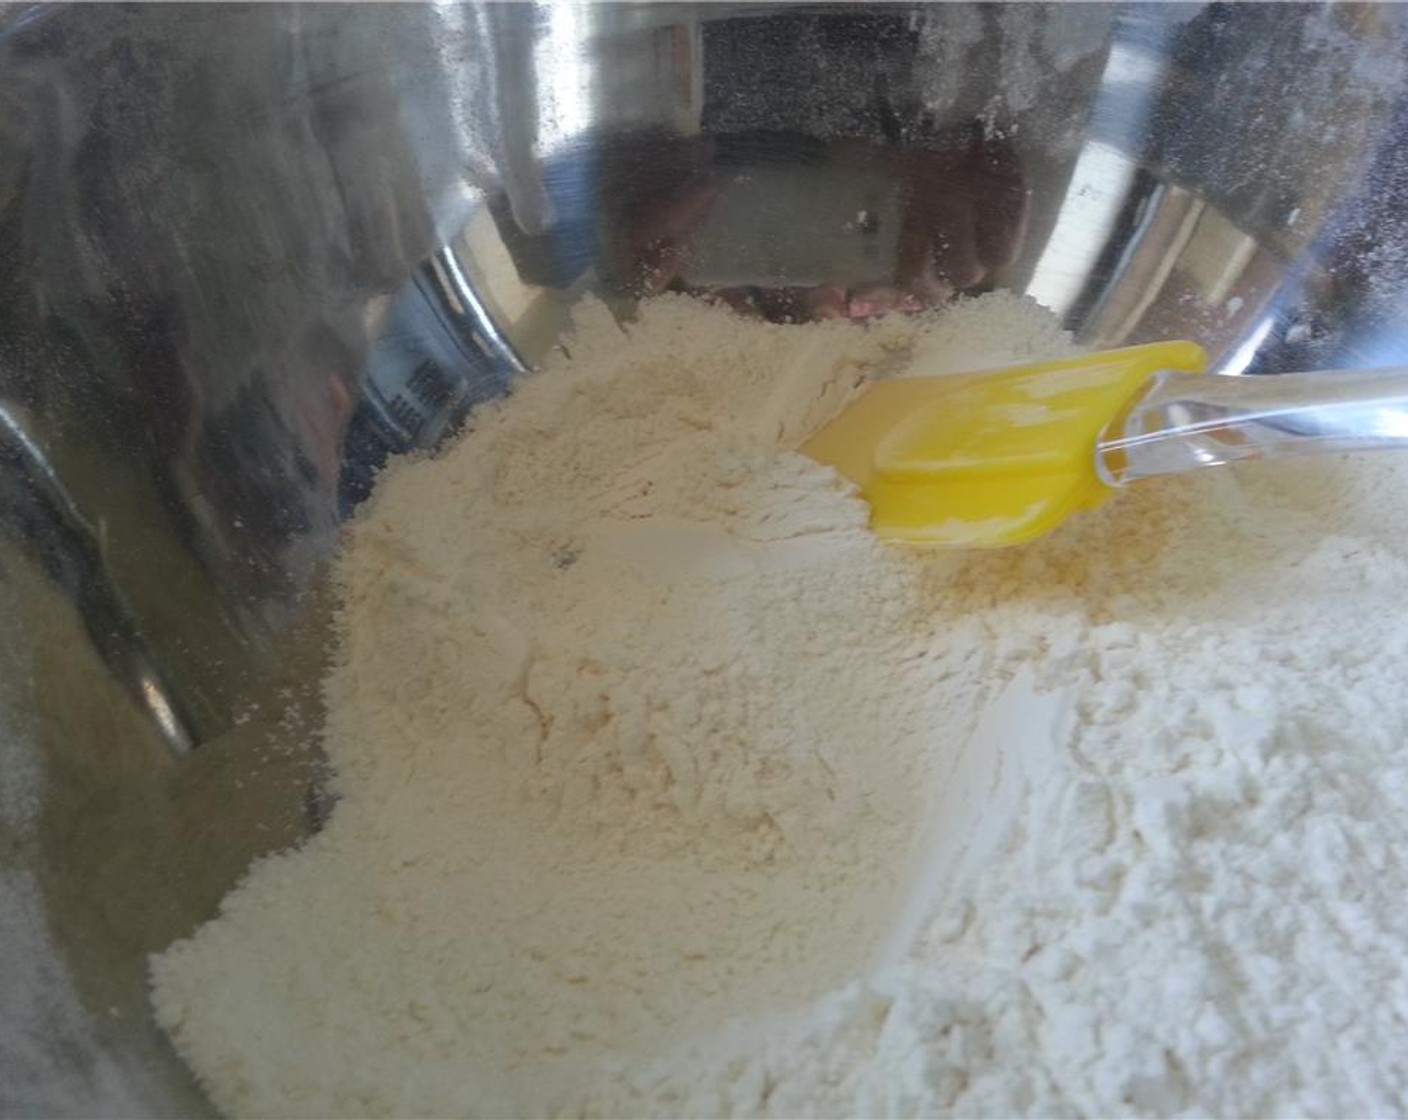 step 1 Melt the Butter (2 Tbsp) in the microwave and set aside to cool. Sift the All-Purpose Flour (3 cups), Baking Powder (1/2 Tbsp) and Baking Soda (1/2 Tbsp) into a mixing bowl. Add the 
Granulated Sugar (1/4 cup) and Salt (1 pinch), then mix.